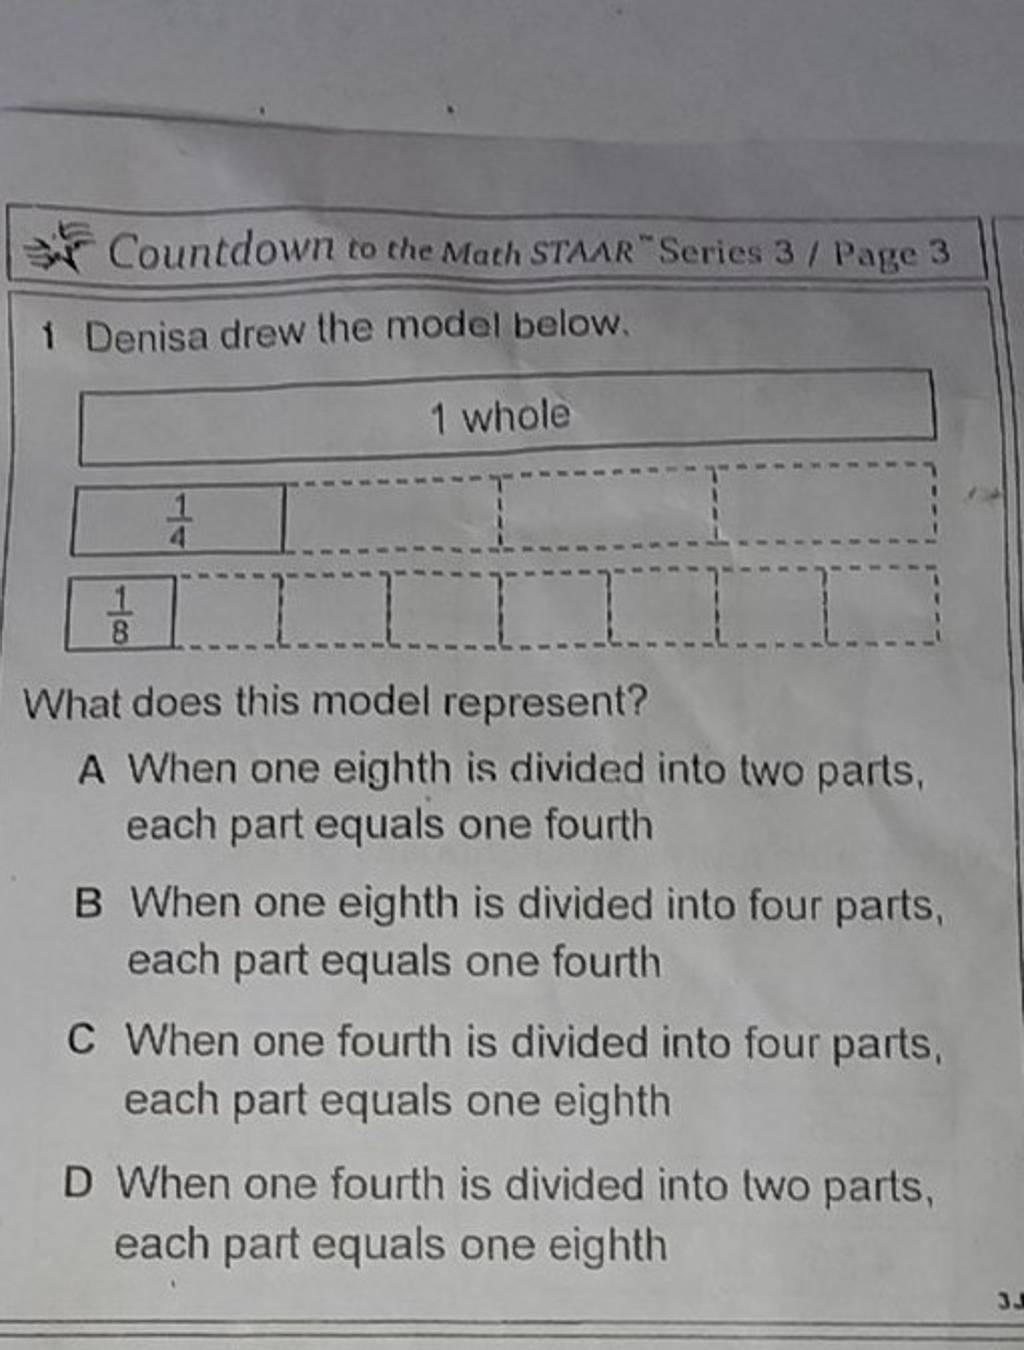 Countdown to the Math STAAR" Series 3 / Page 3
1 Denisa drew the model